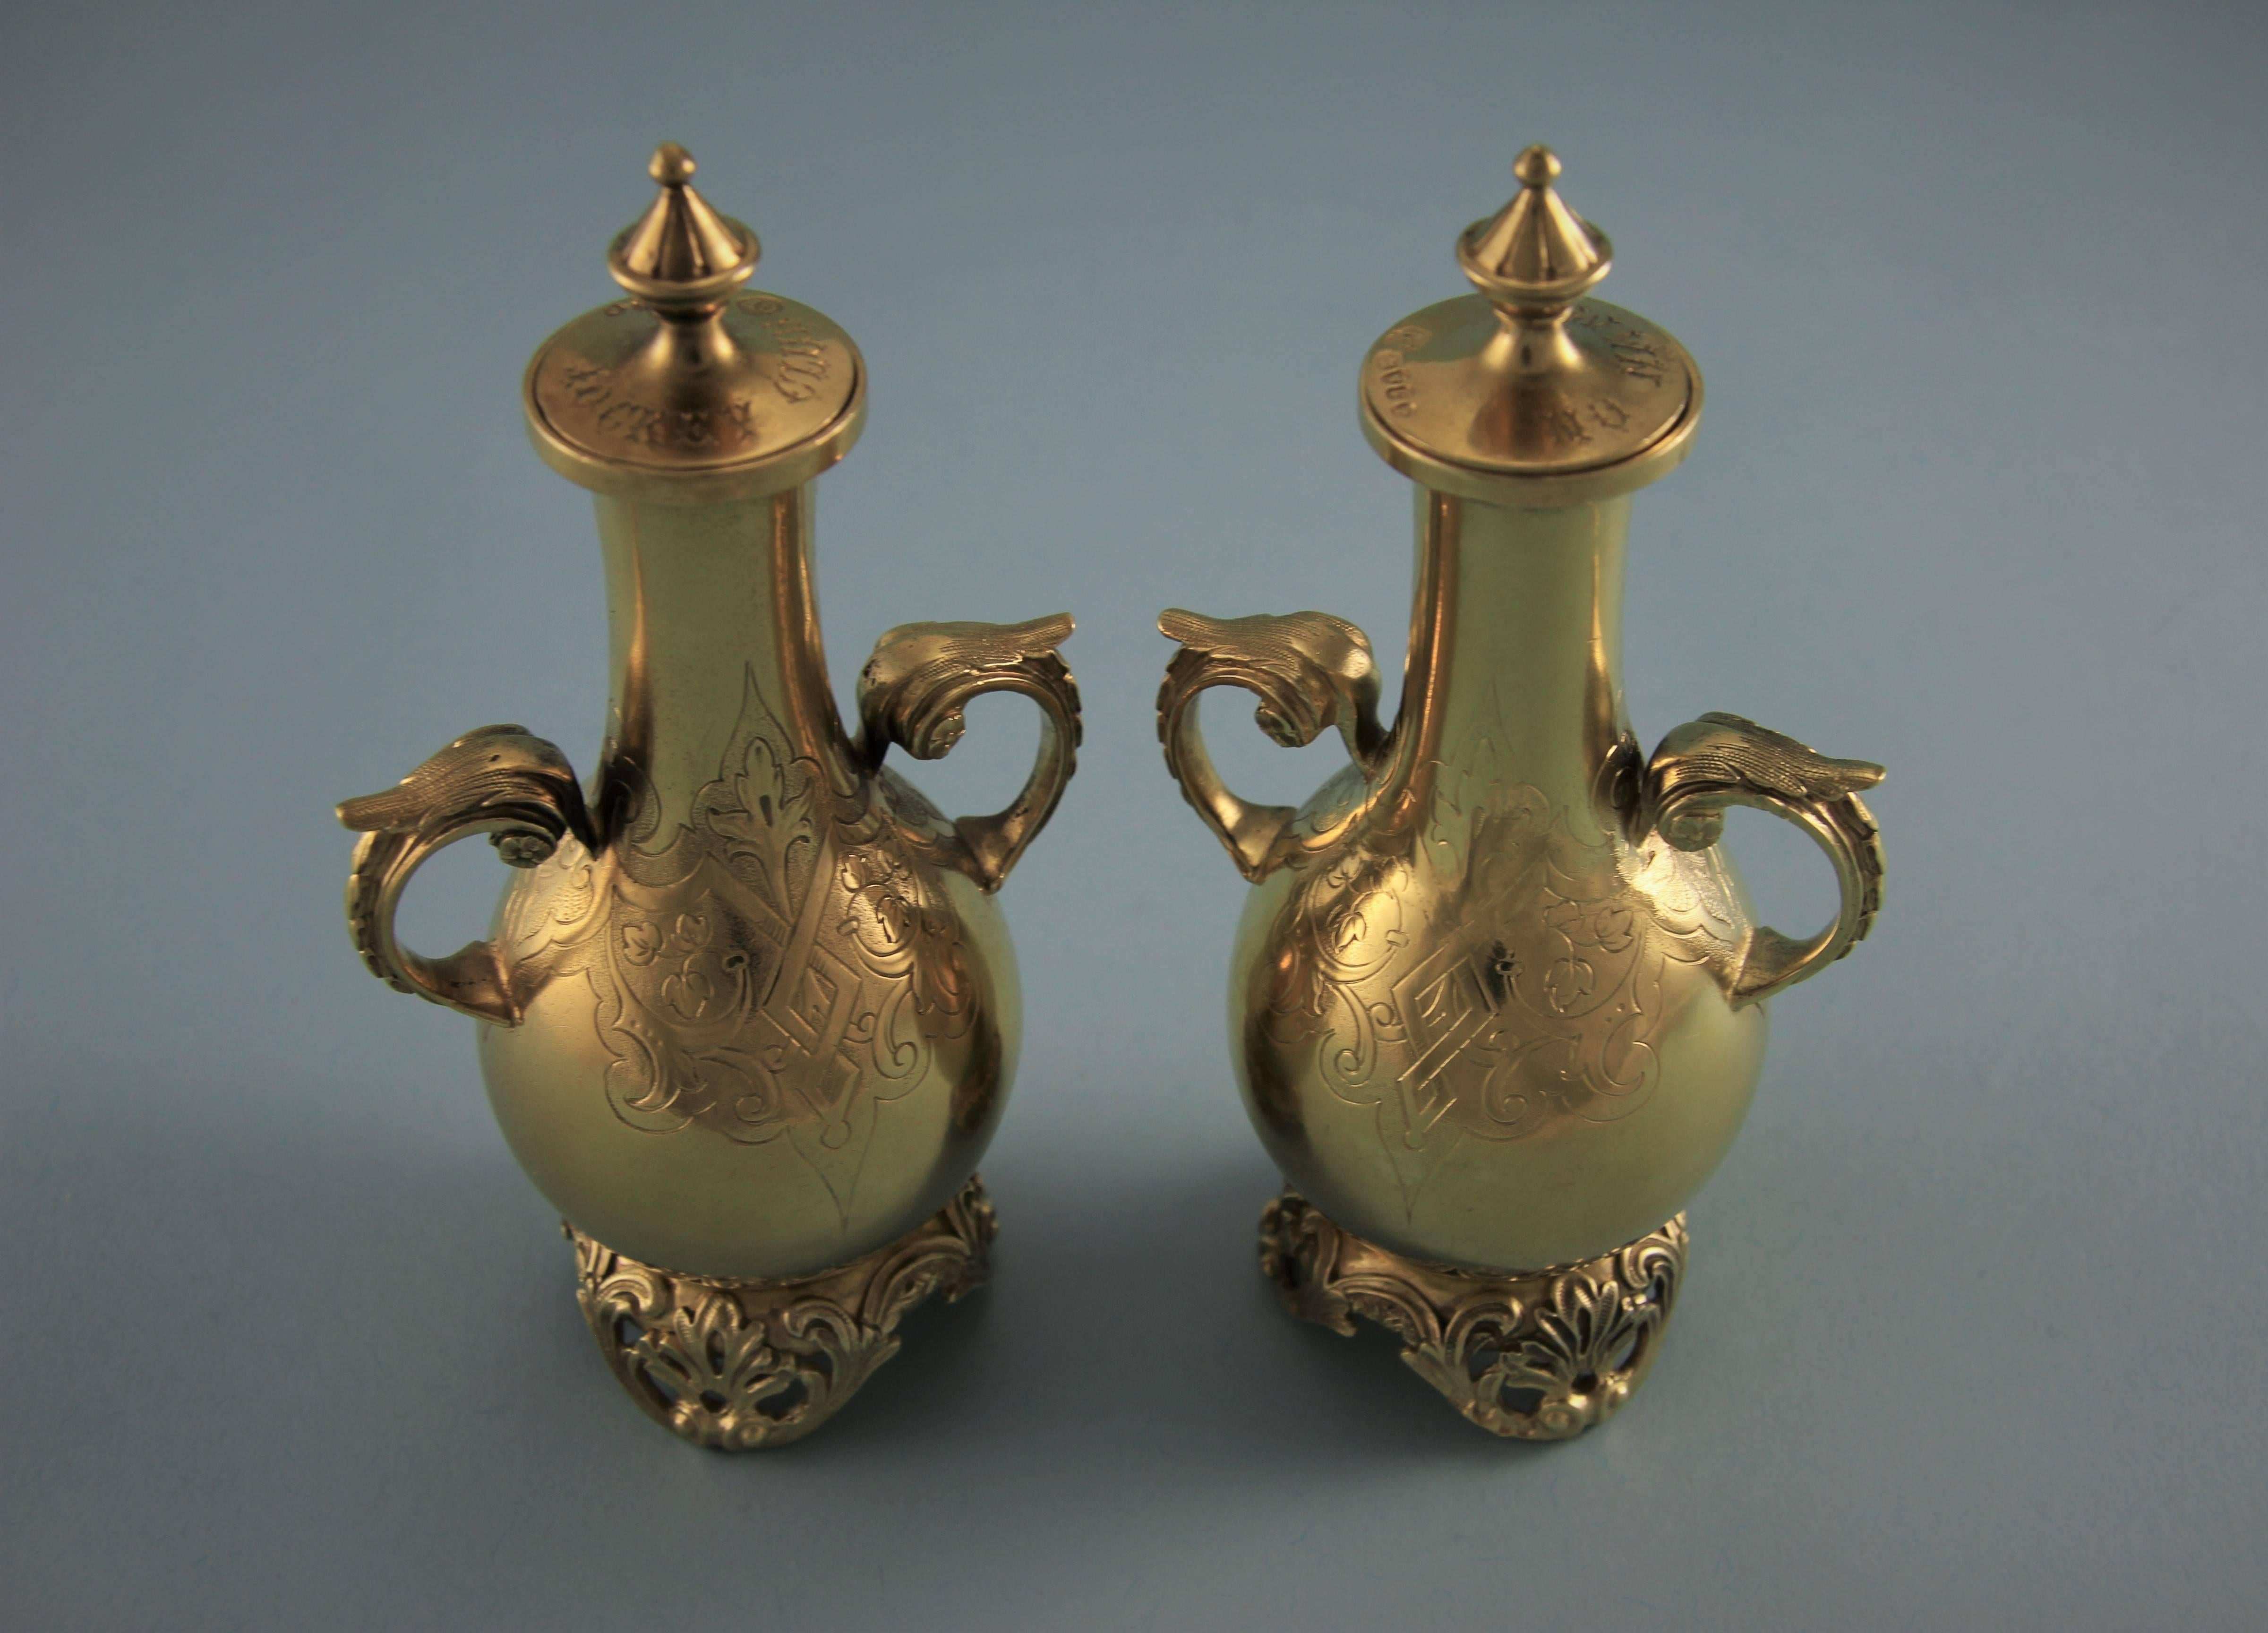 English Pair of Victorian Silver Gilt Perfume Bottles on Stands, George Fox London 1871 For Sale